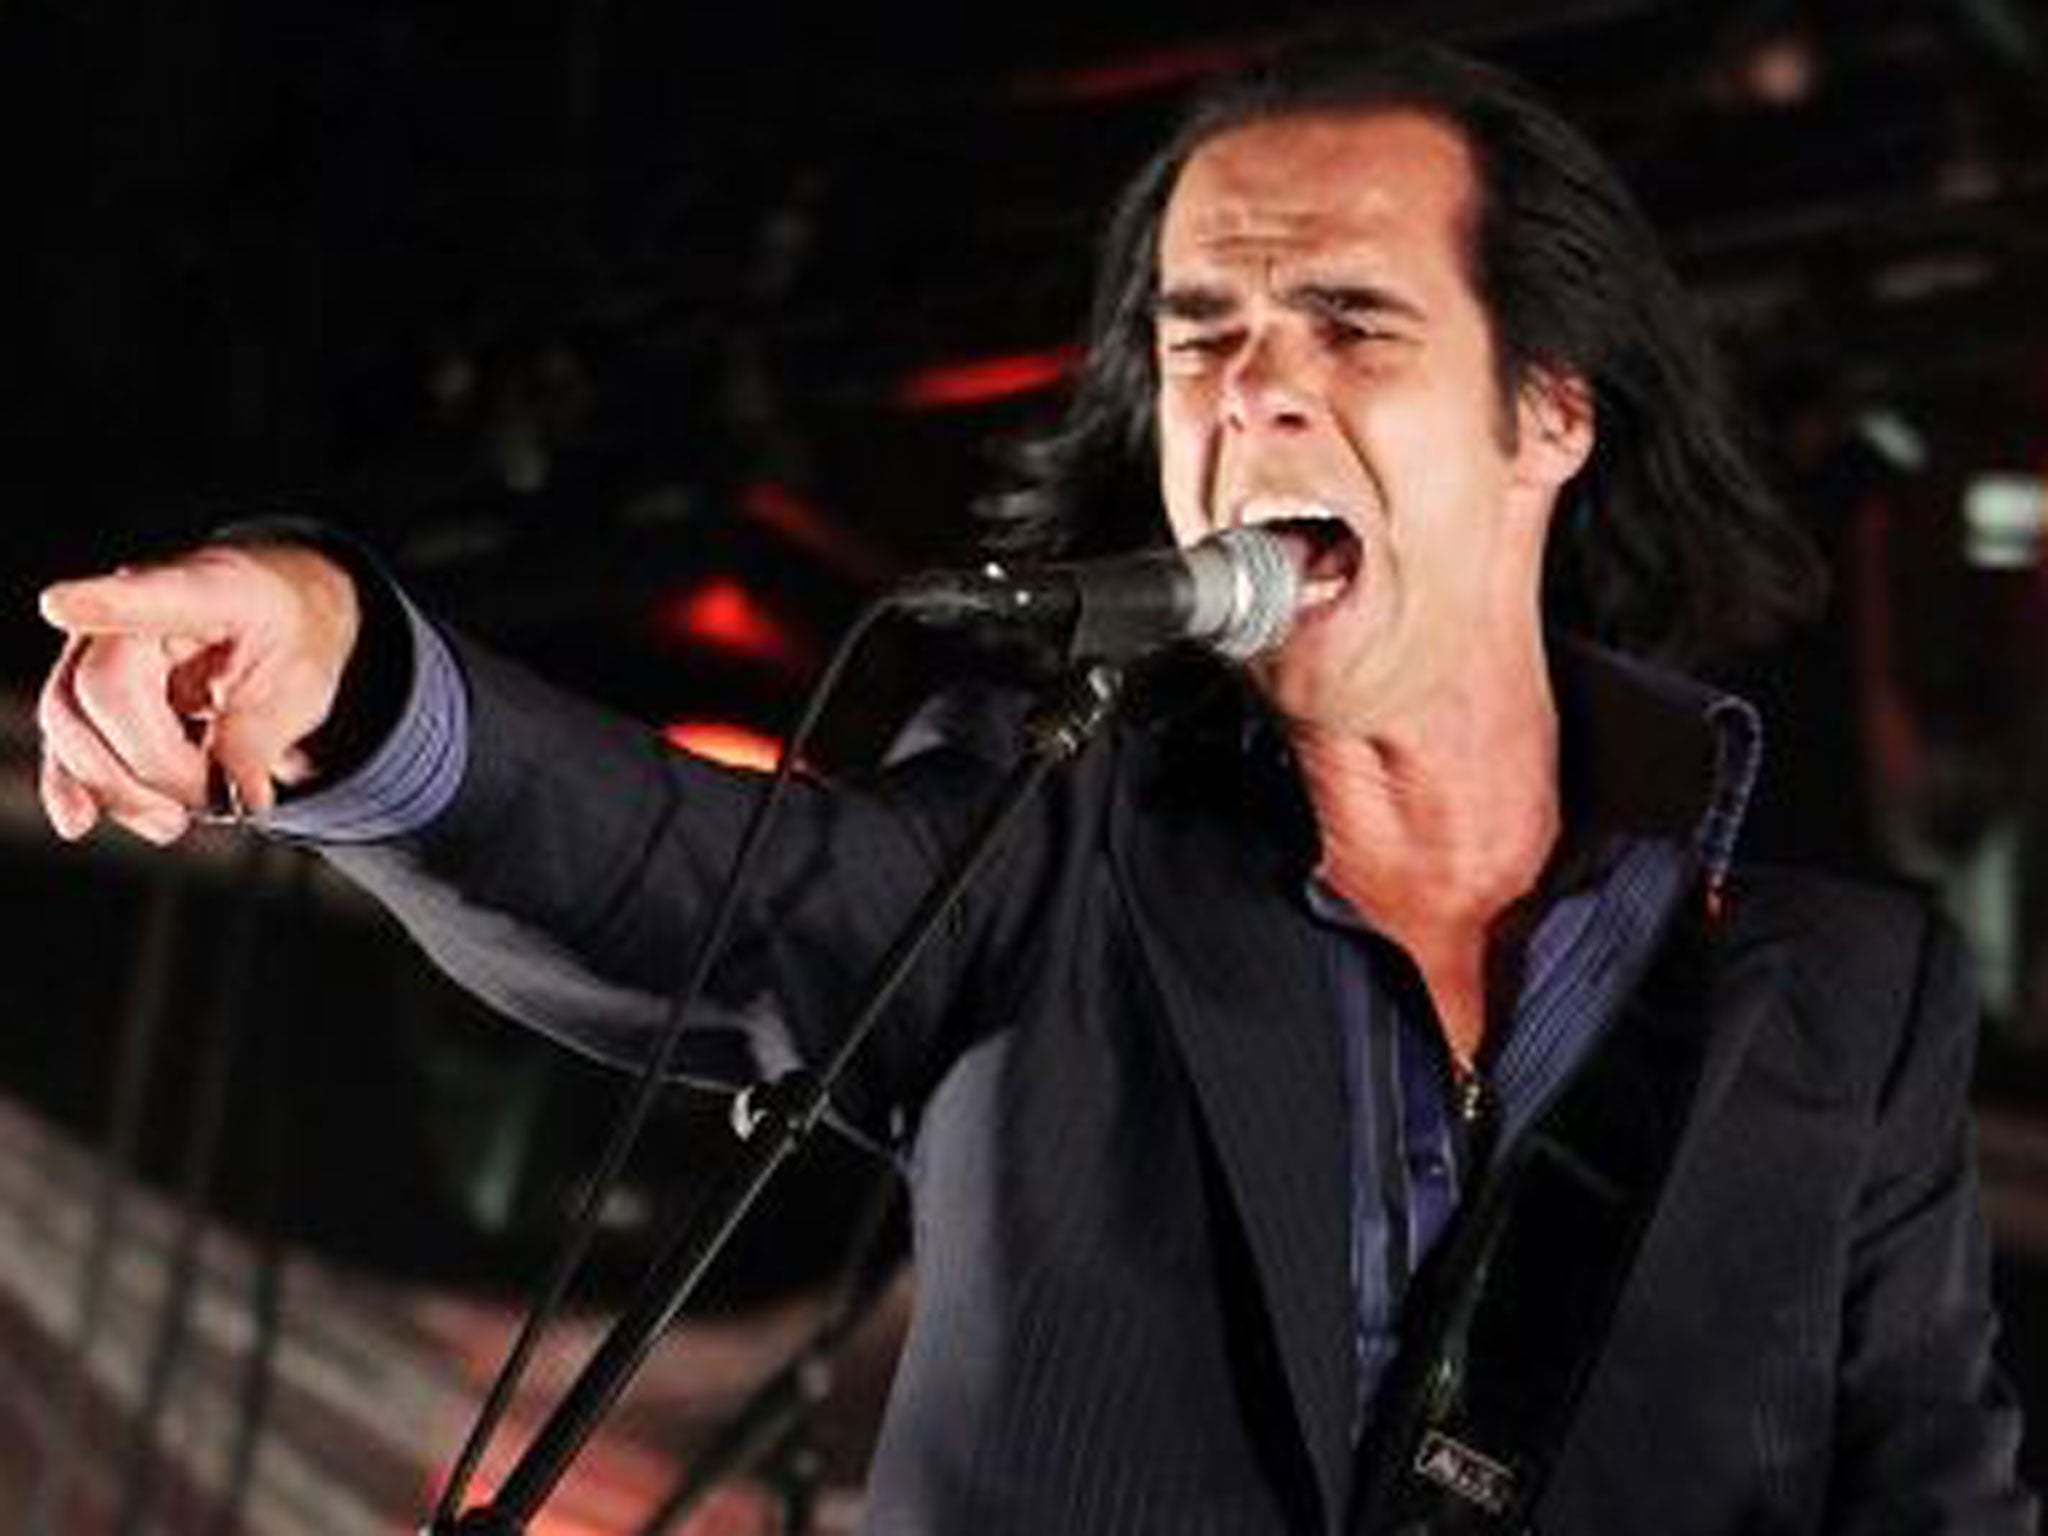 Nick cave and the Bad Seeds: sometimes, less is much, much more